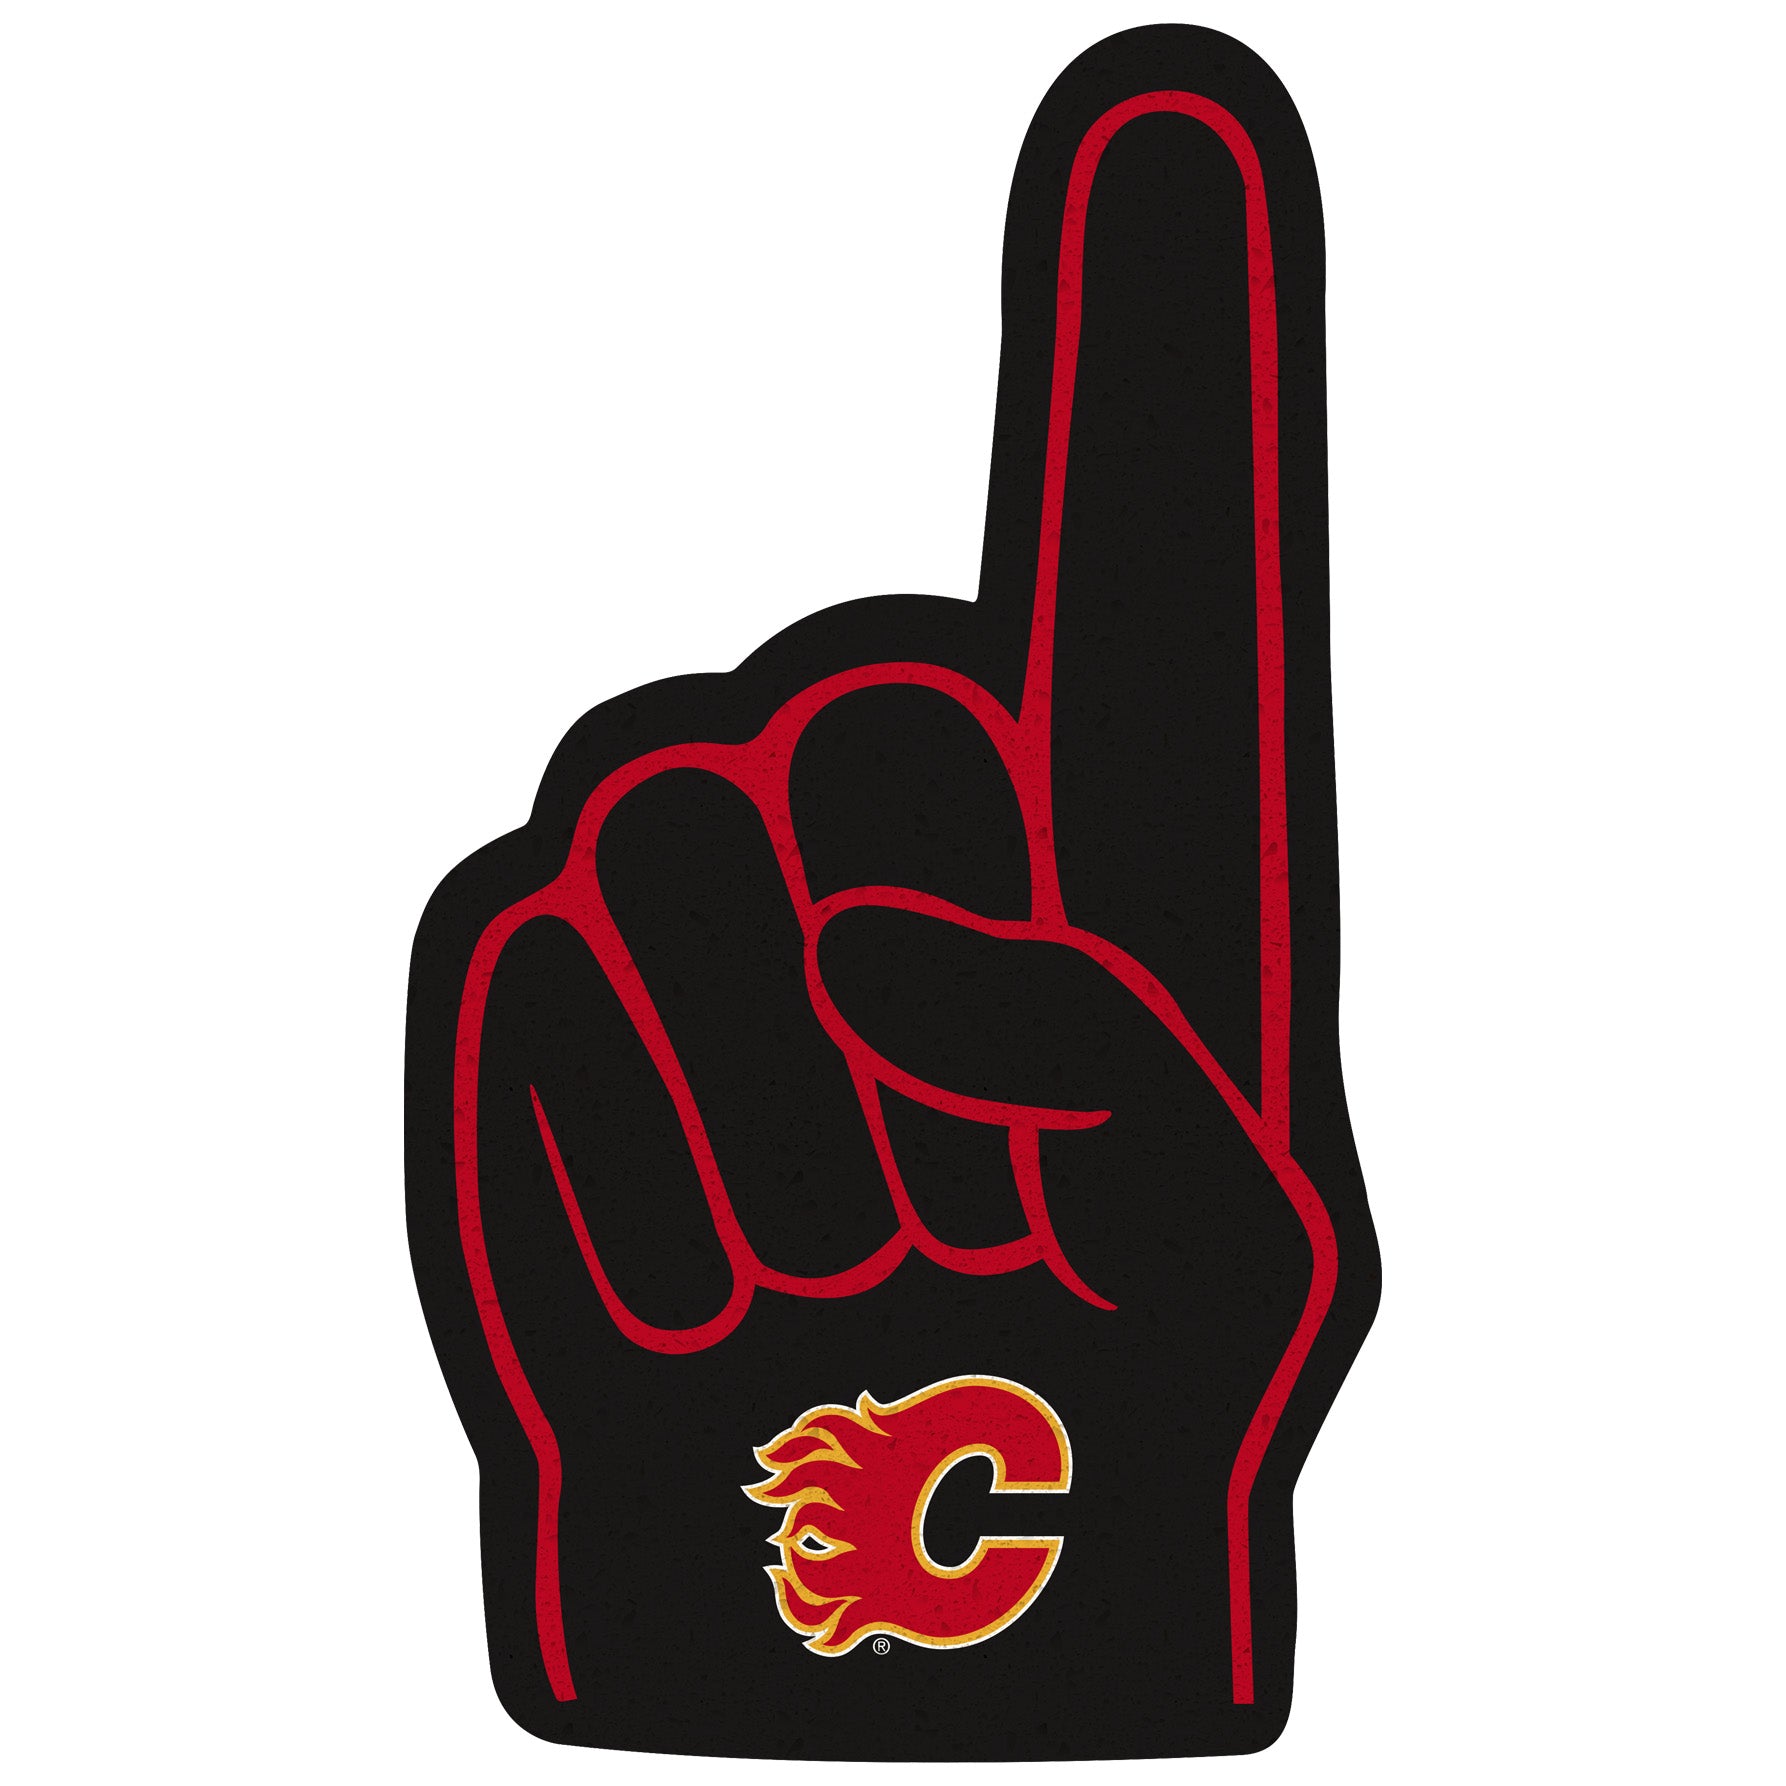 Calgary Flames Sign - 22 Round Distressed Logo